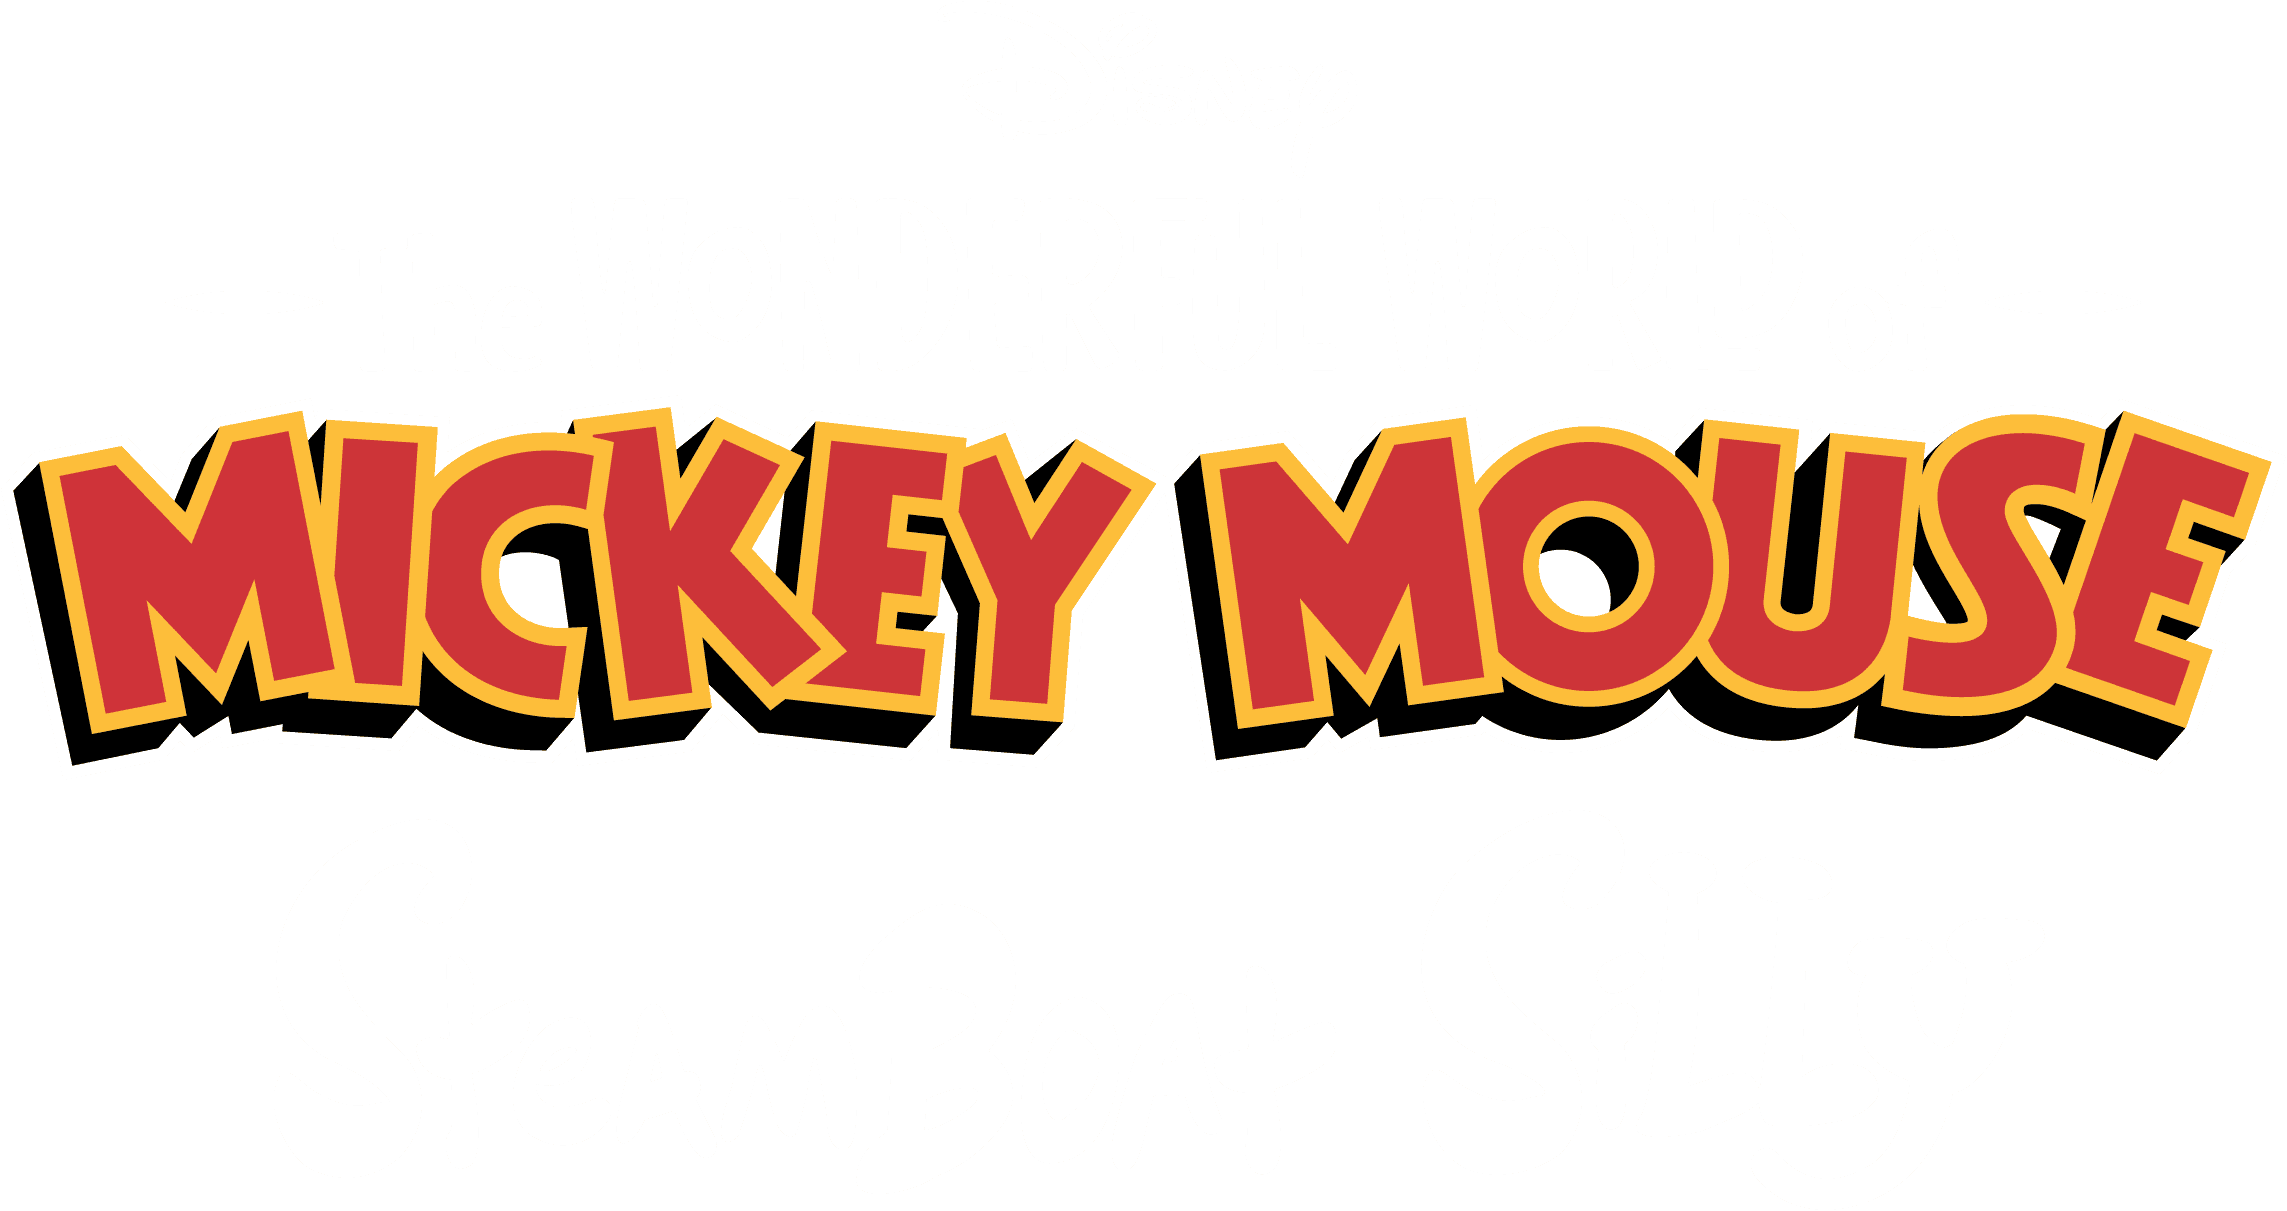 The Wonderful World of Mickey Mouse: Steamboat Silly logo